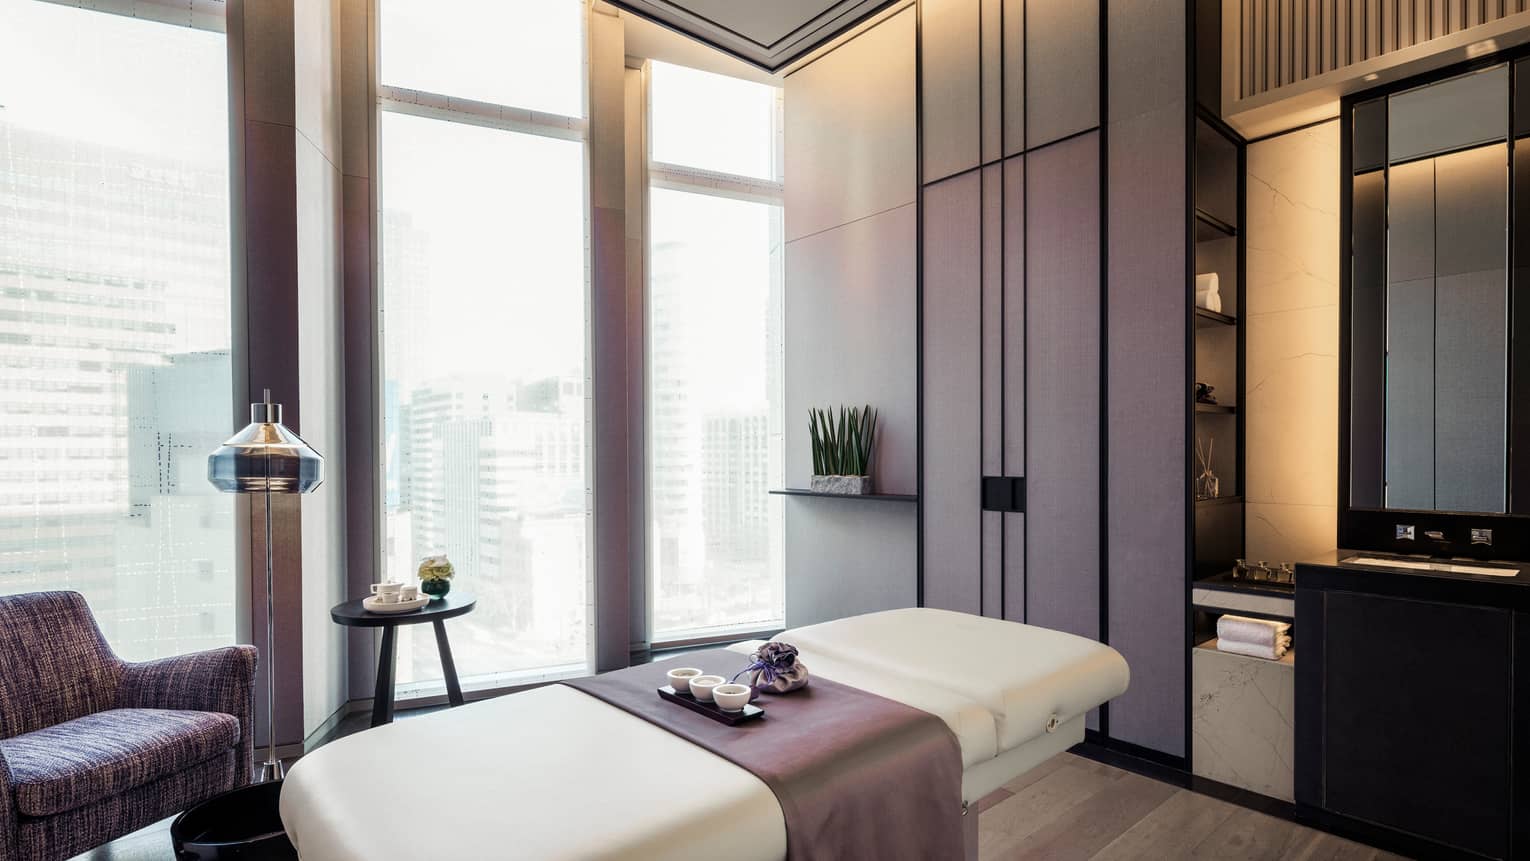 Purple accent chair, blanket over massage table with Spa tray by floor-to-ceiling windows, shades